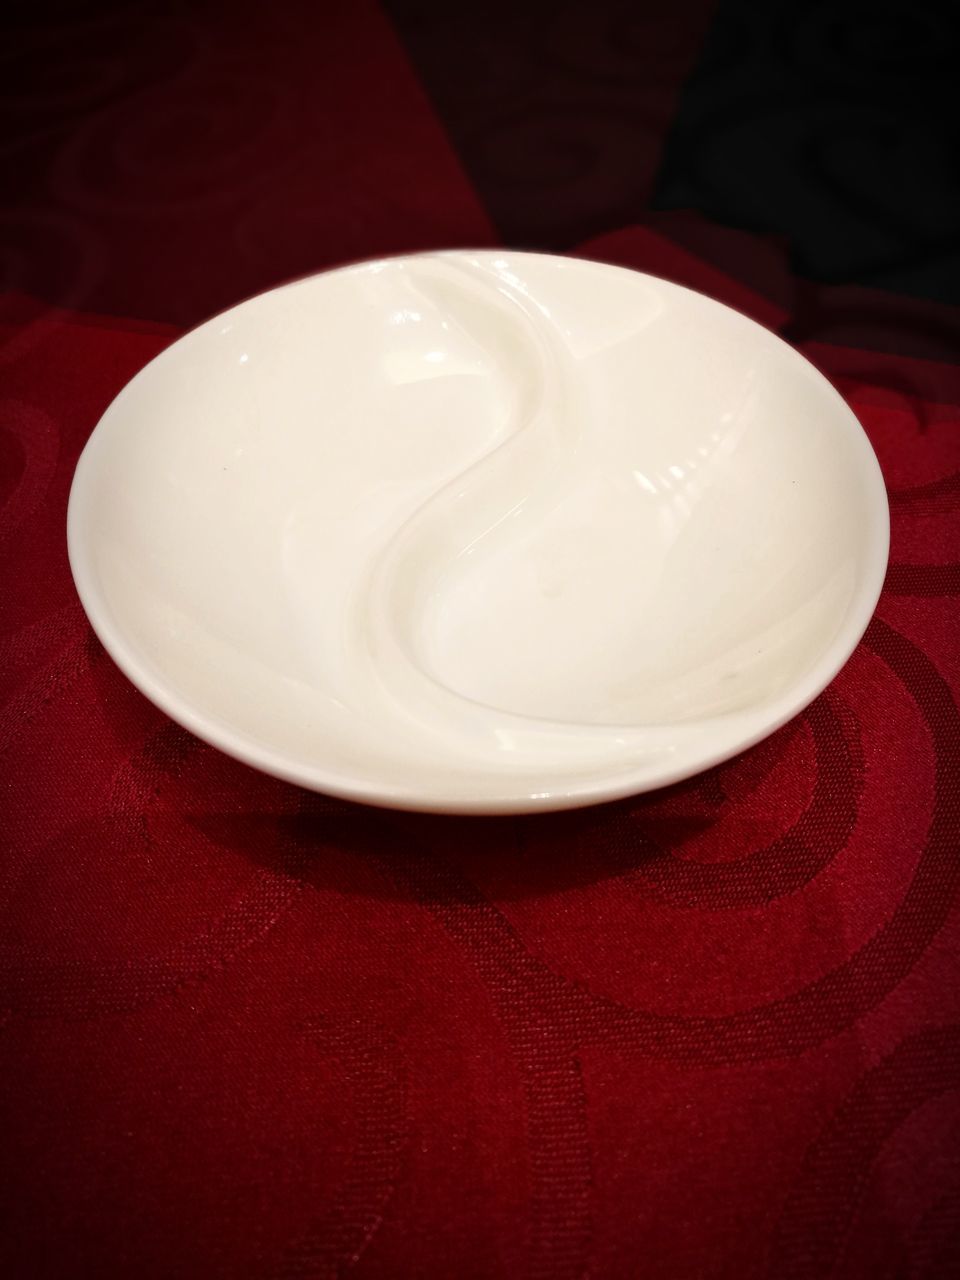 CLOSE-UP VIEW OF WHITE PLATE